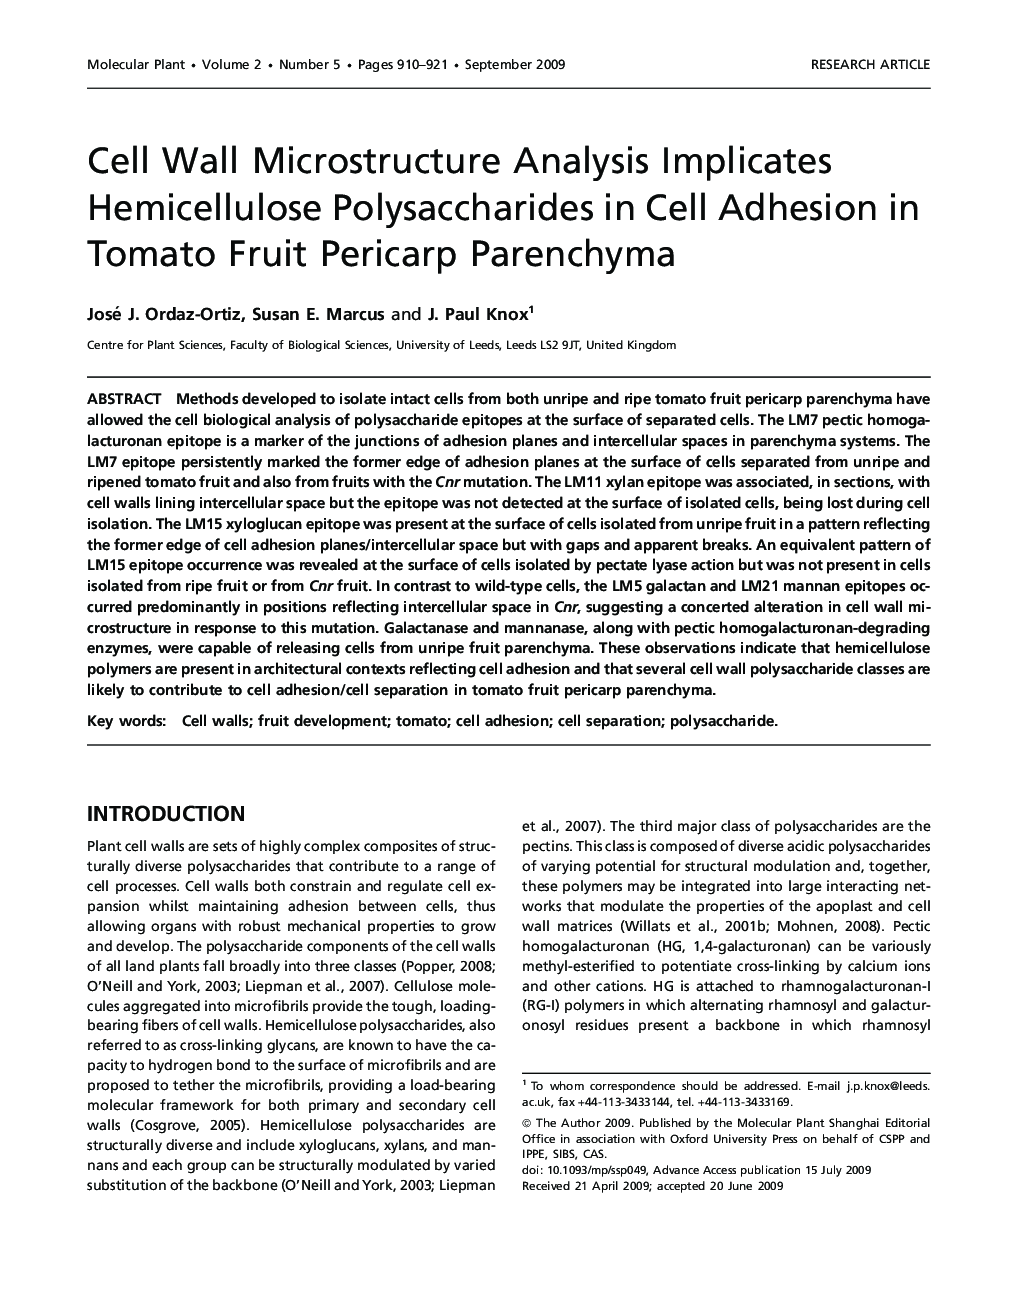 Cell Wall Microstructure Analysis Implicates Hemicellulose Polysaccharides in Cell Adhesion in Tomato Fruit Pericarp Parenchyma 